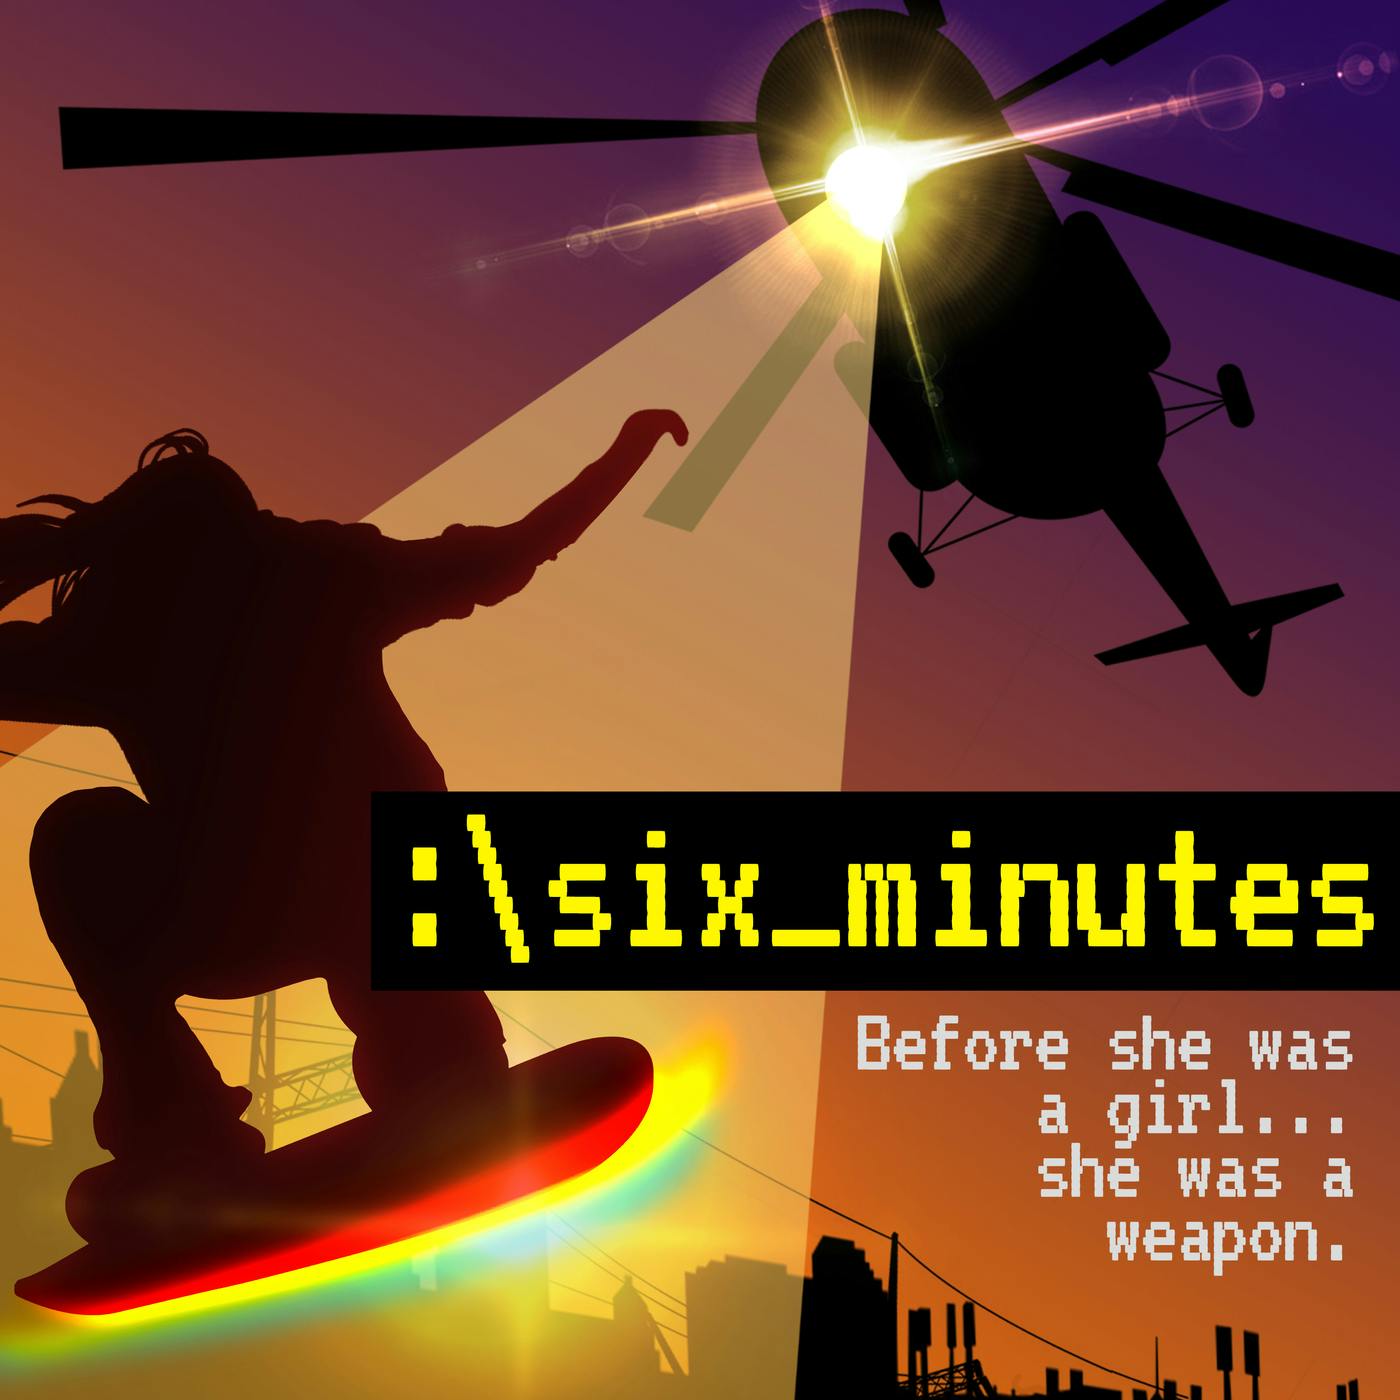 S1 E97: Six Minutes in Flames